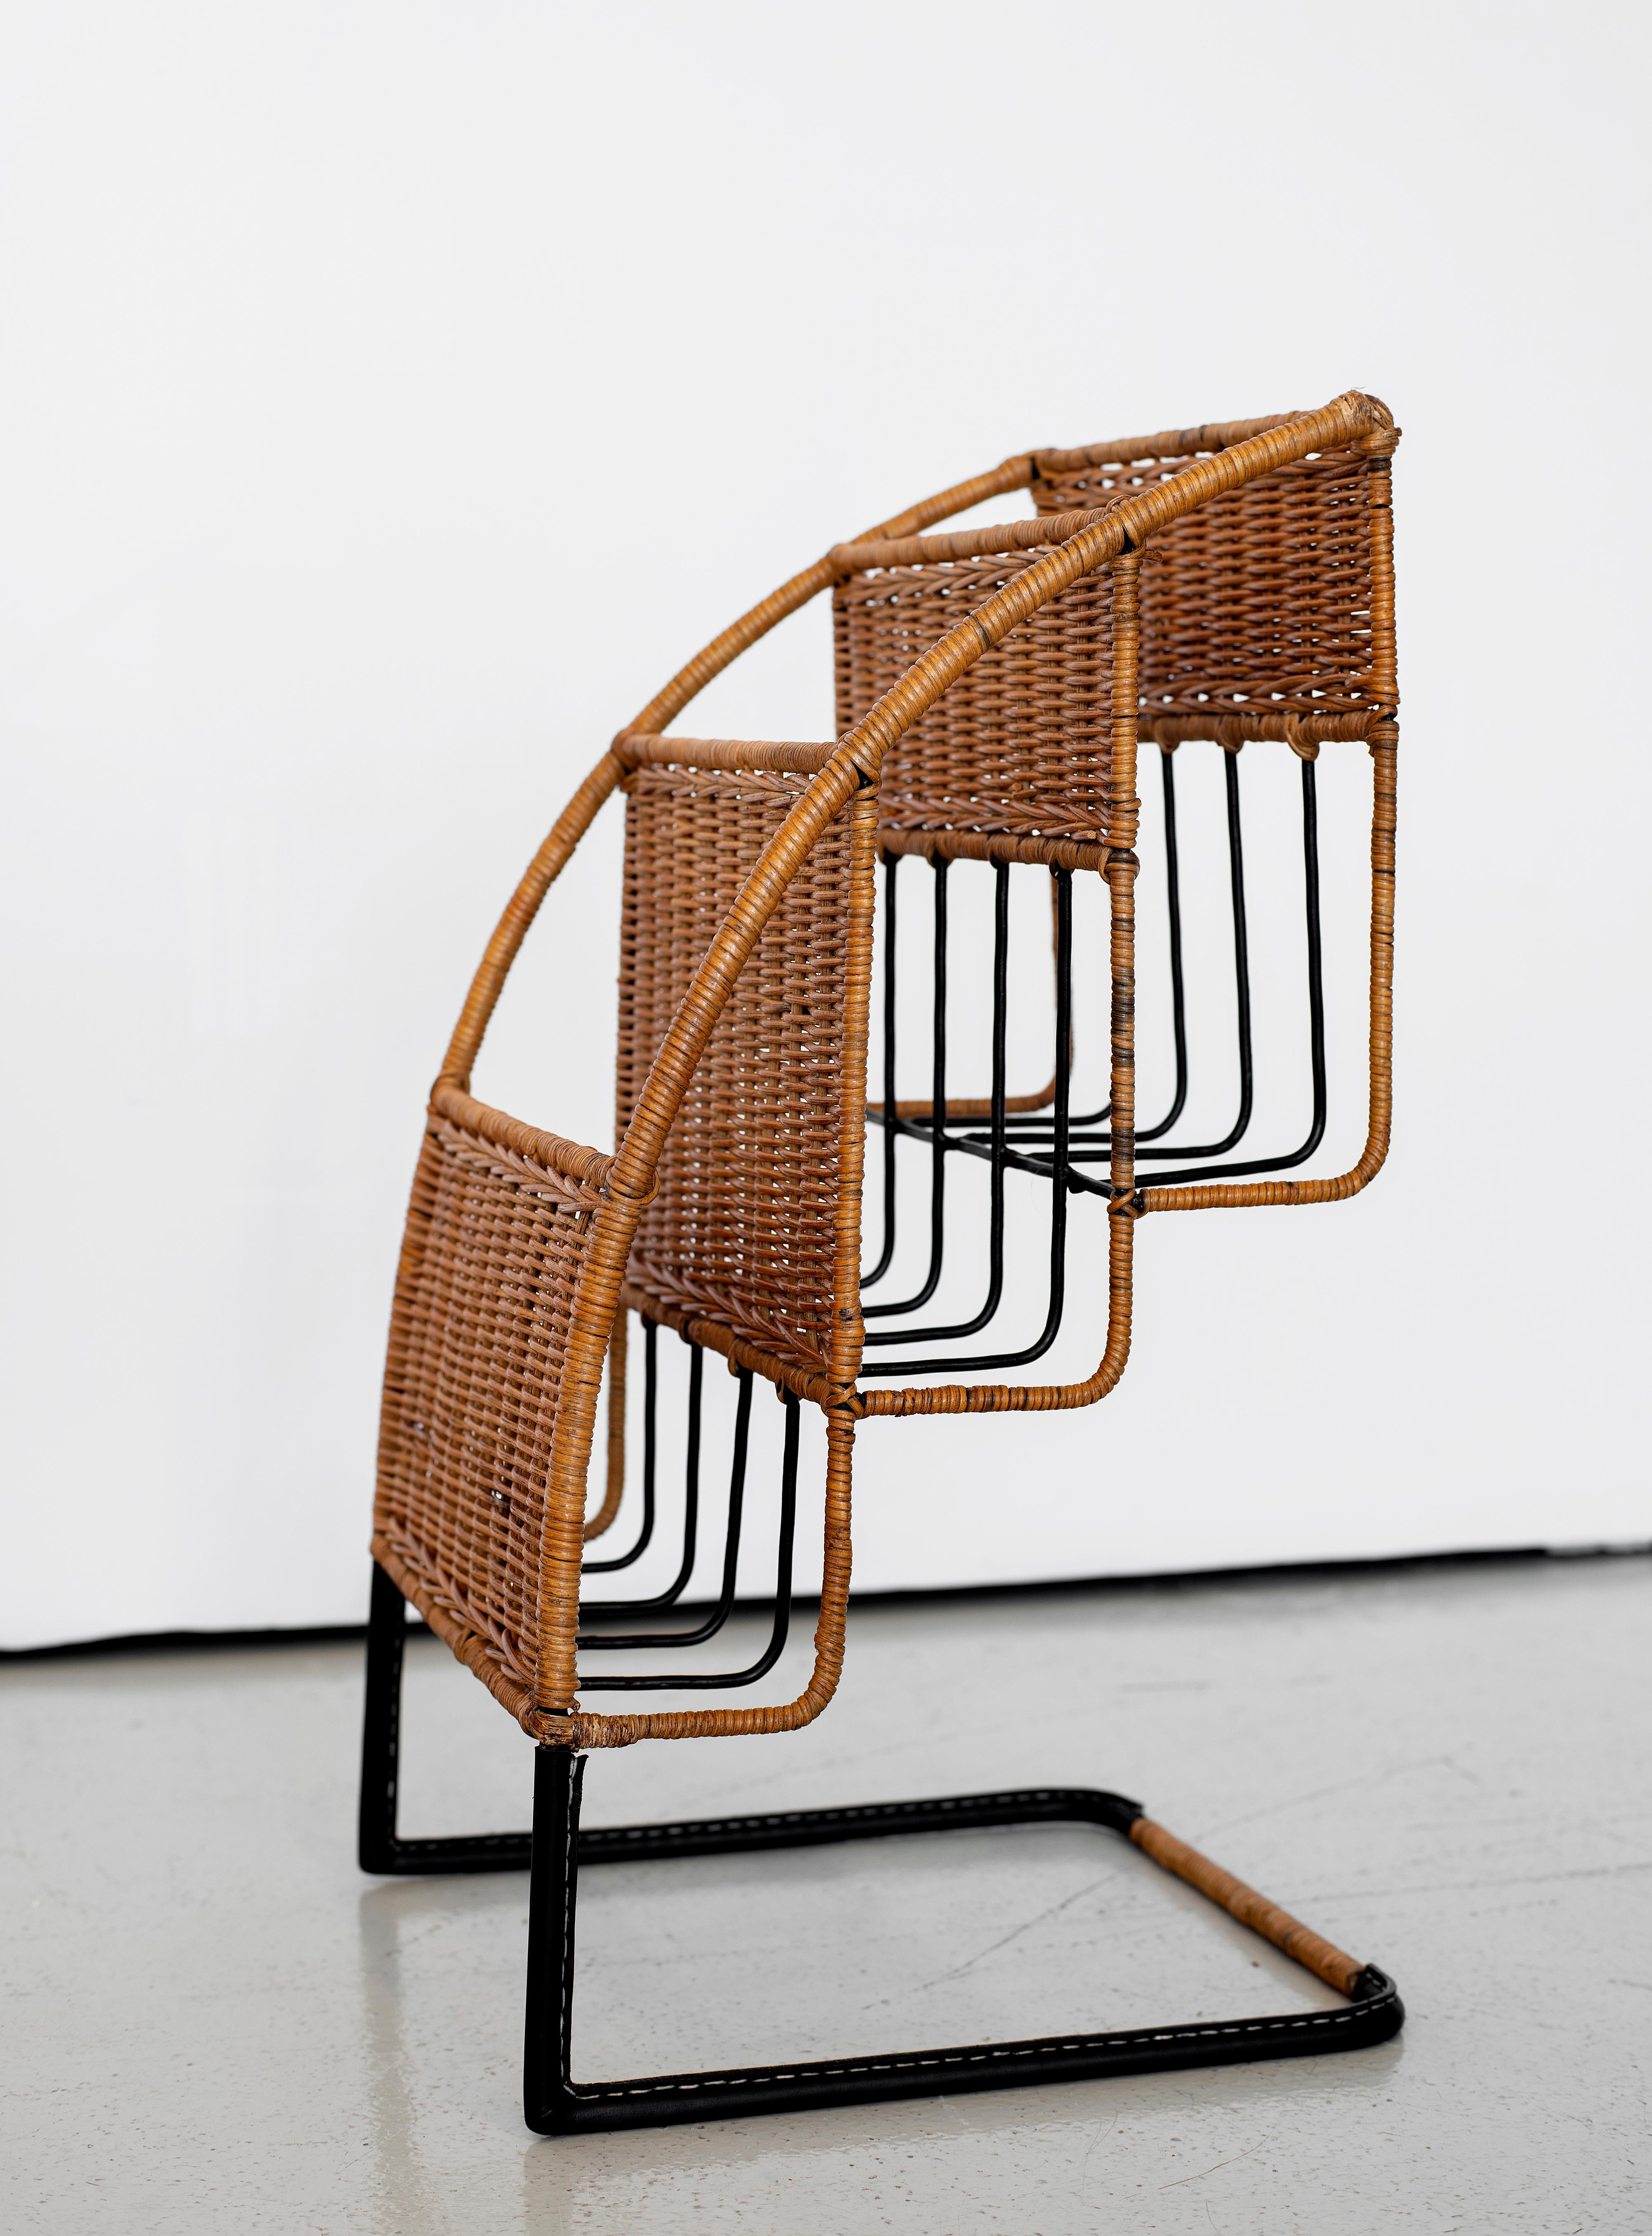 Wicker Magazine Rack Attributed to Jacques Adnet 1